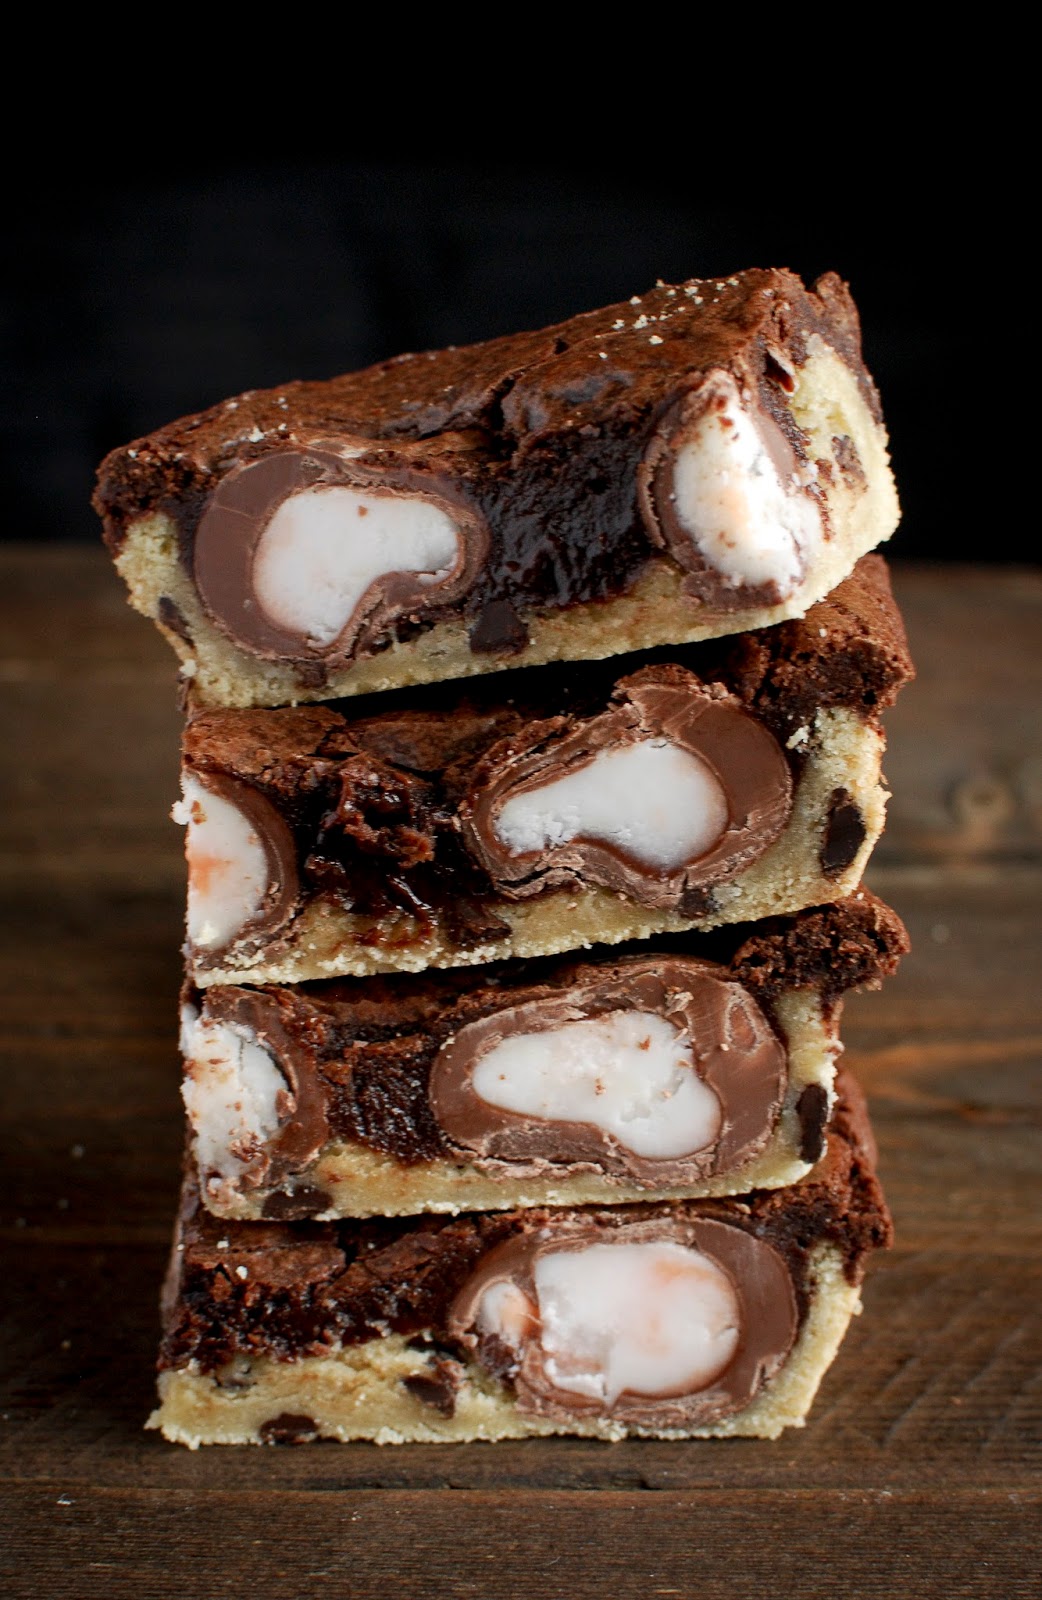 Take a slutty brownie, stuff them with Creme Eggs instead of Oreos. Thank me later!